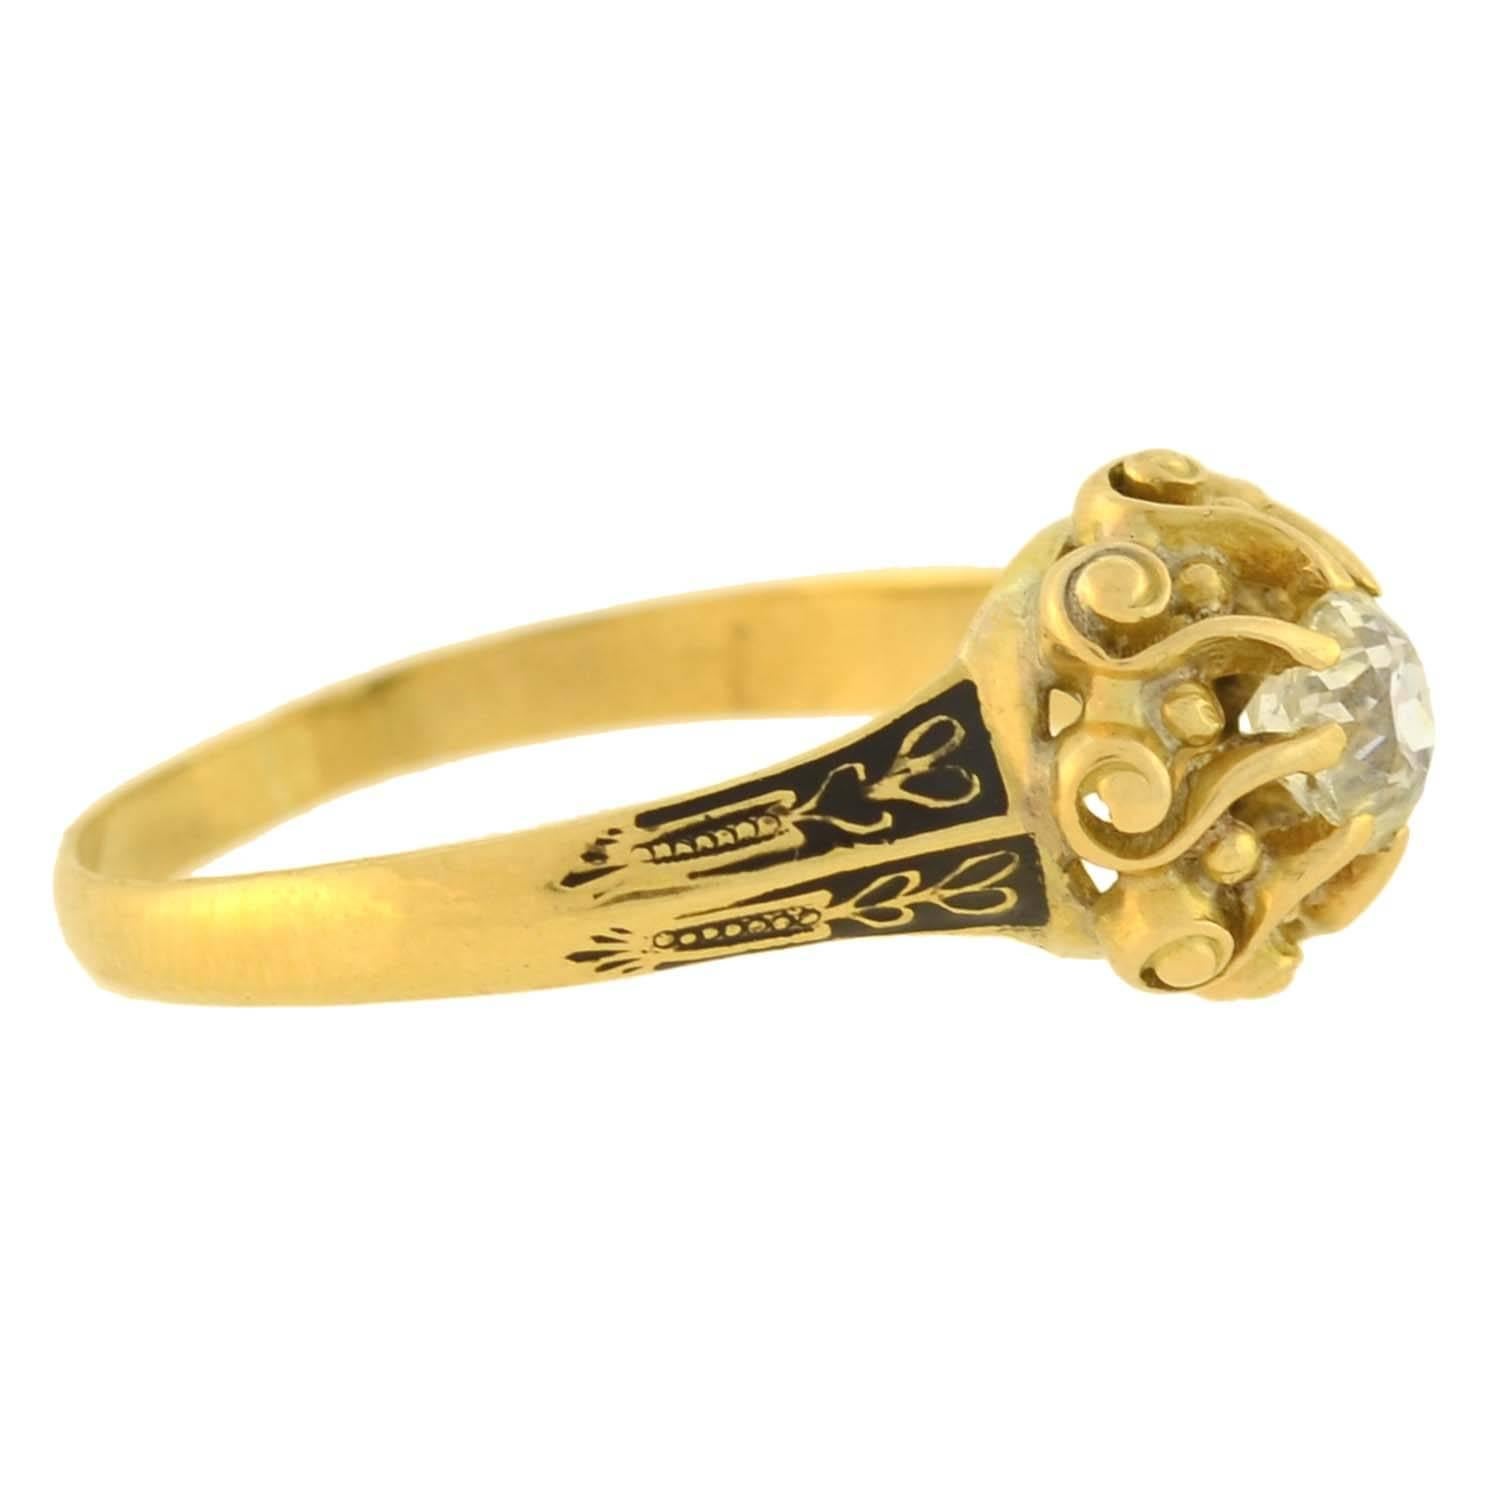 An exquisite diamond ring from the Georgian (ca1830) era! This gorgeous 18kt gold ring features a stunning cushion Mine Cut diamond at the center, which weighs approximately 0.60ct with estimated K color and SI2 clarity. The diamond is prong set